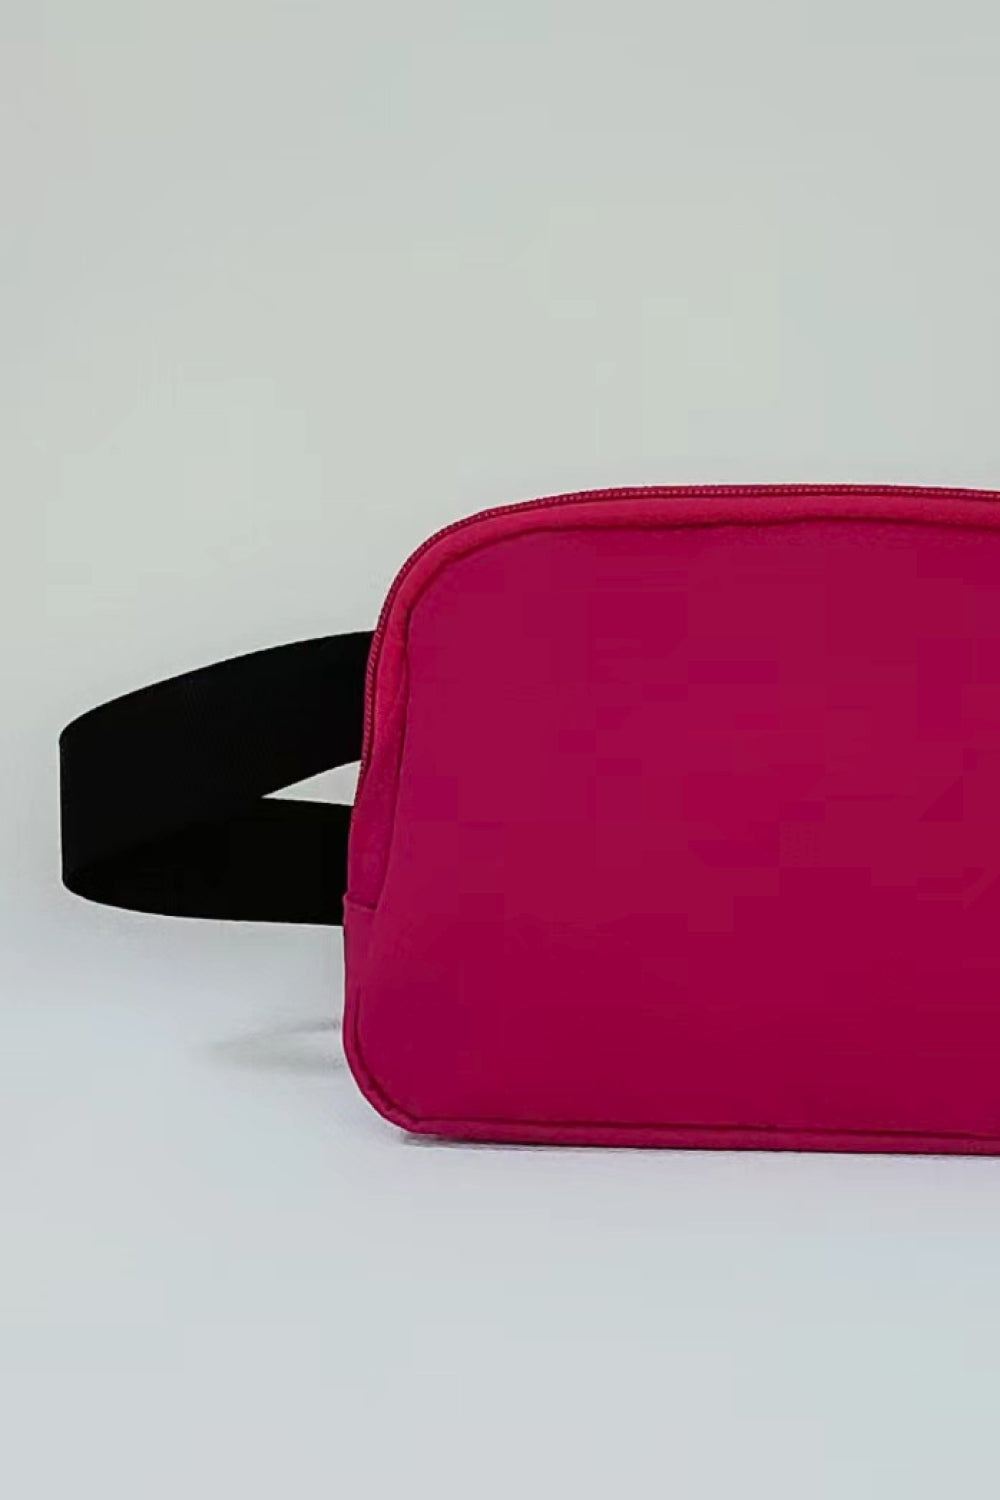 Buckle Zip Closure Fanny Pack - The Teal Antler Boutique